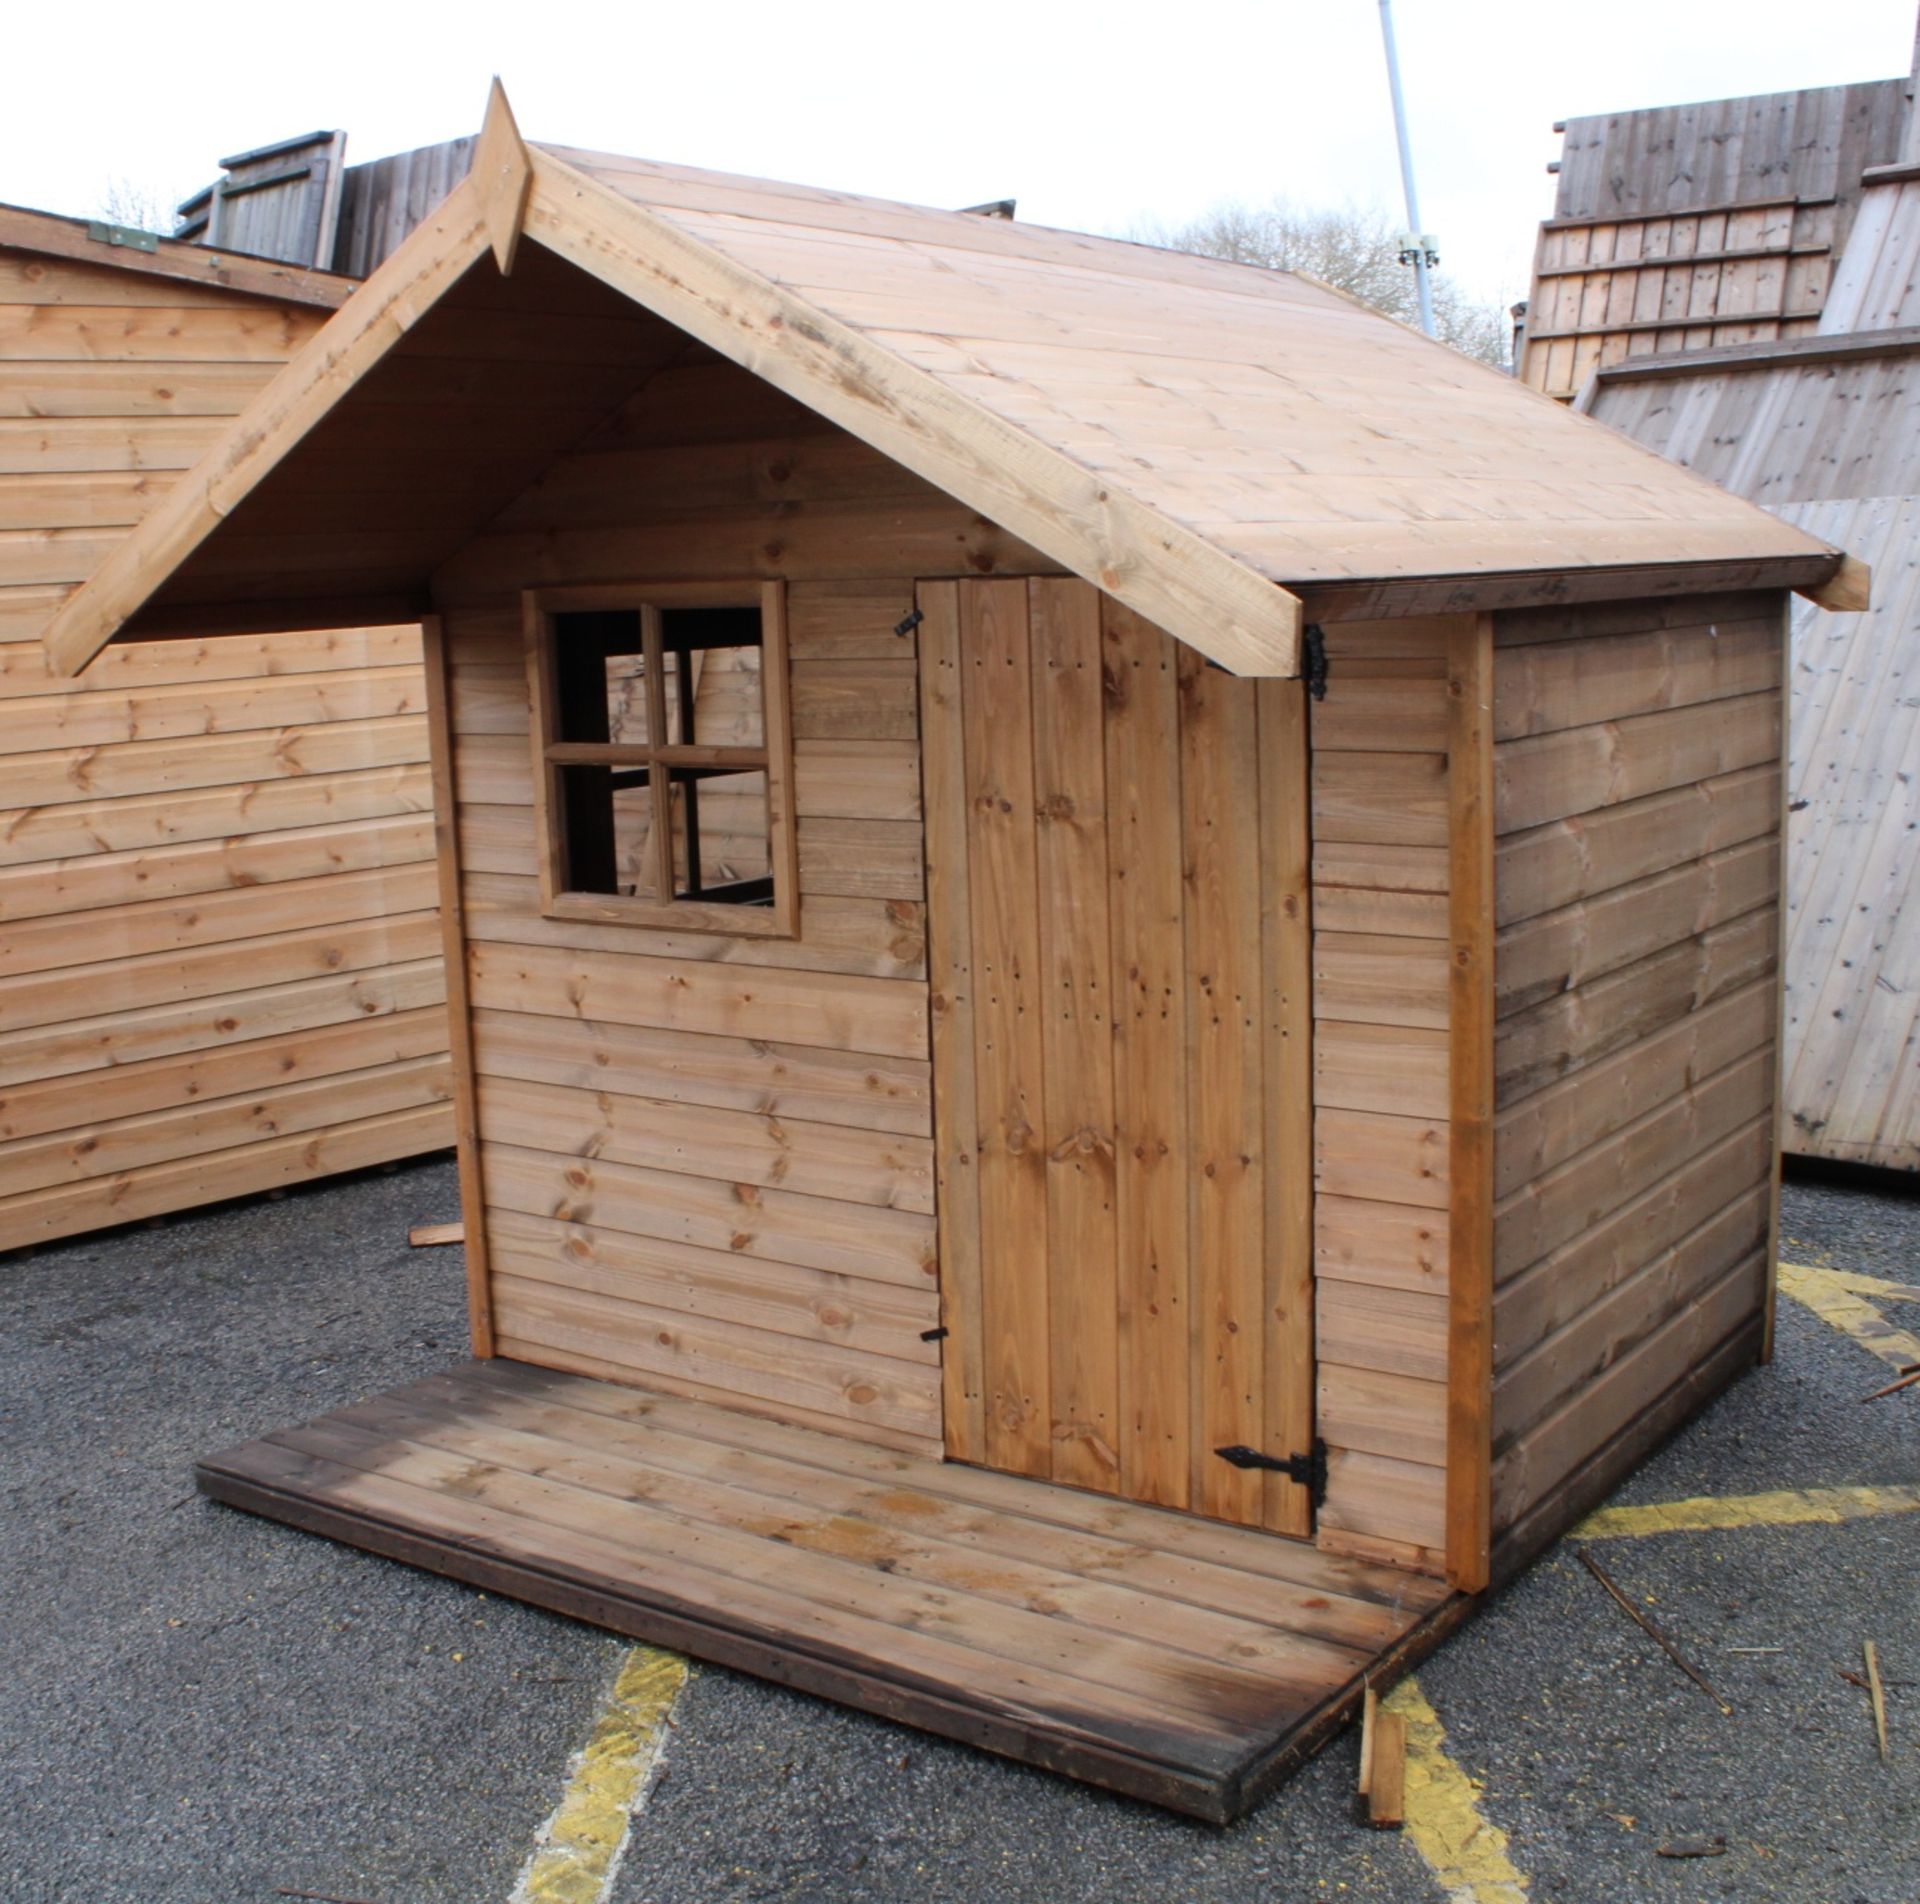 4x6 kids playhouse with overhang and veranda, Stnadrad 16mm Nominal Cladding - Image 4 of 5